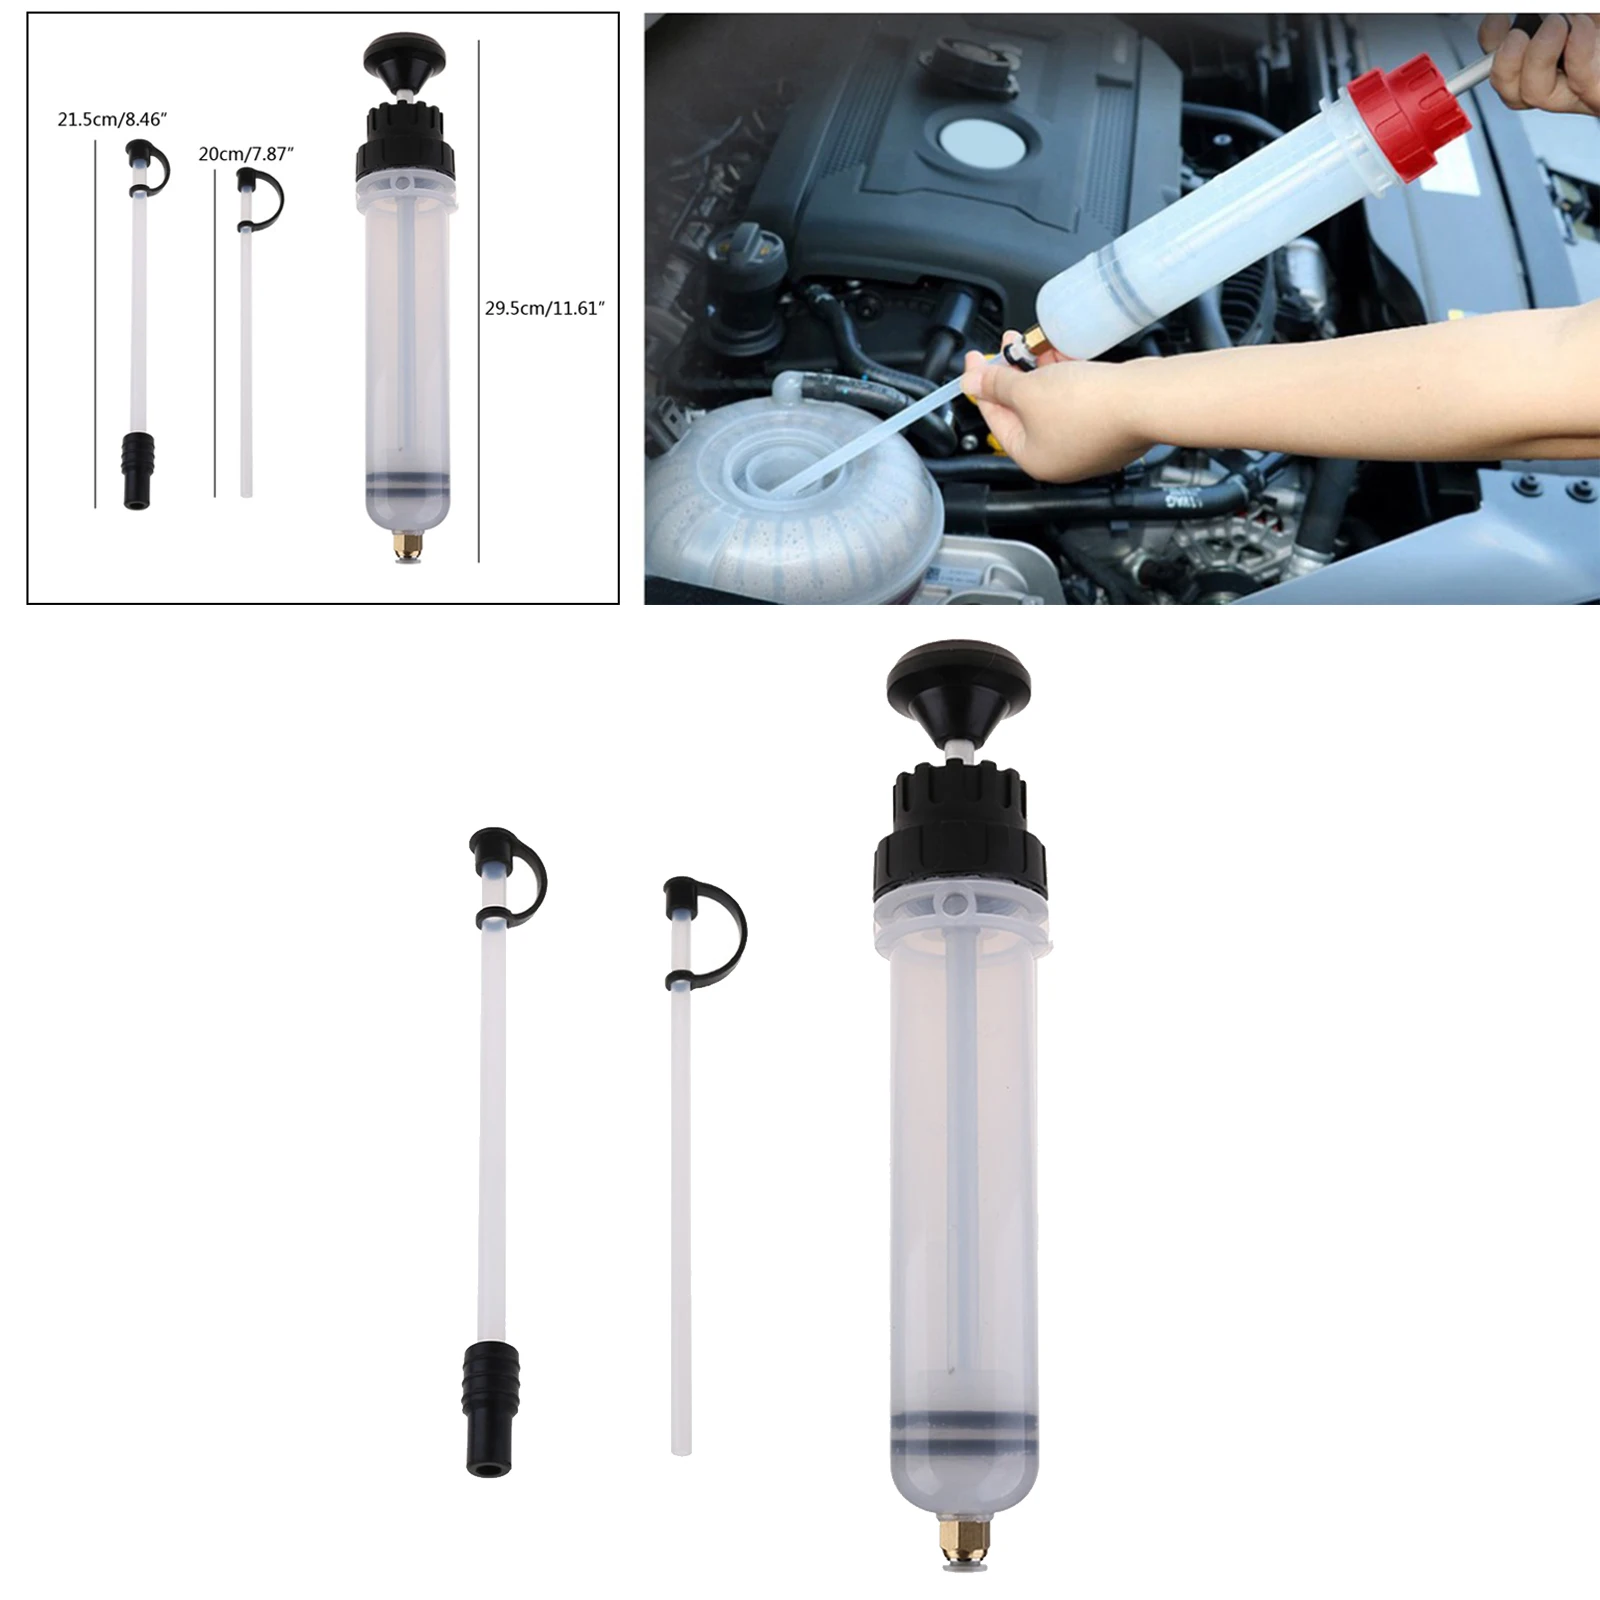 7OZ 200cc Car Oil Fluid Extractor Filling Syringe Bottle Transfer Hand Pump Tools .Sturdy, Leakless, Accurate, Reliable